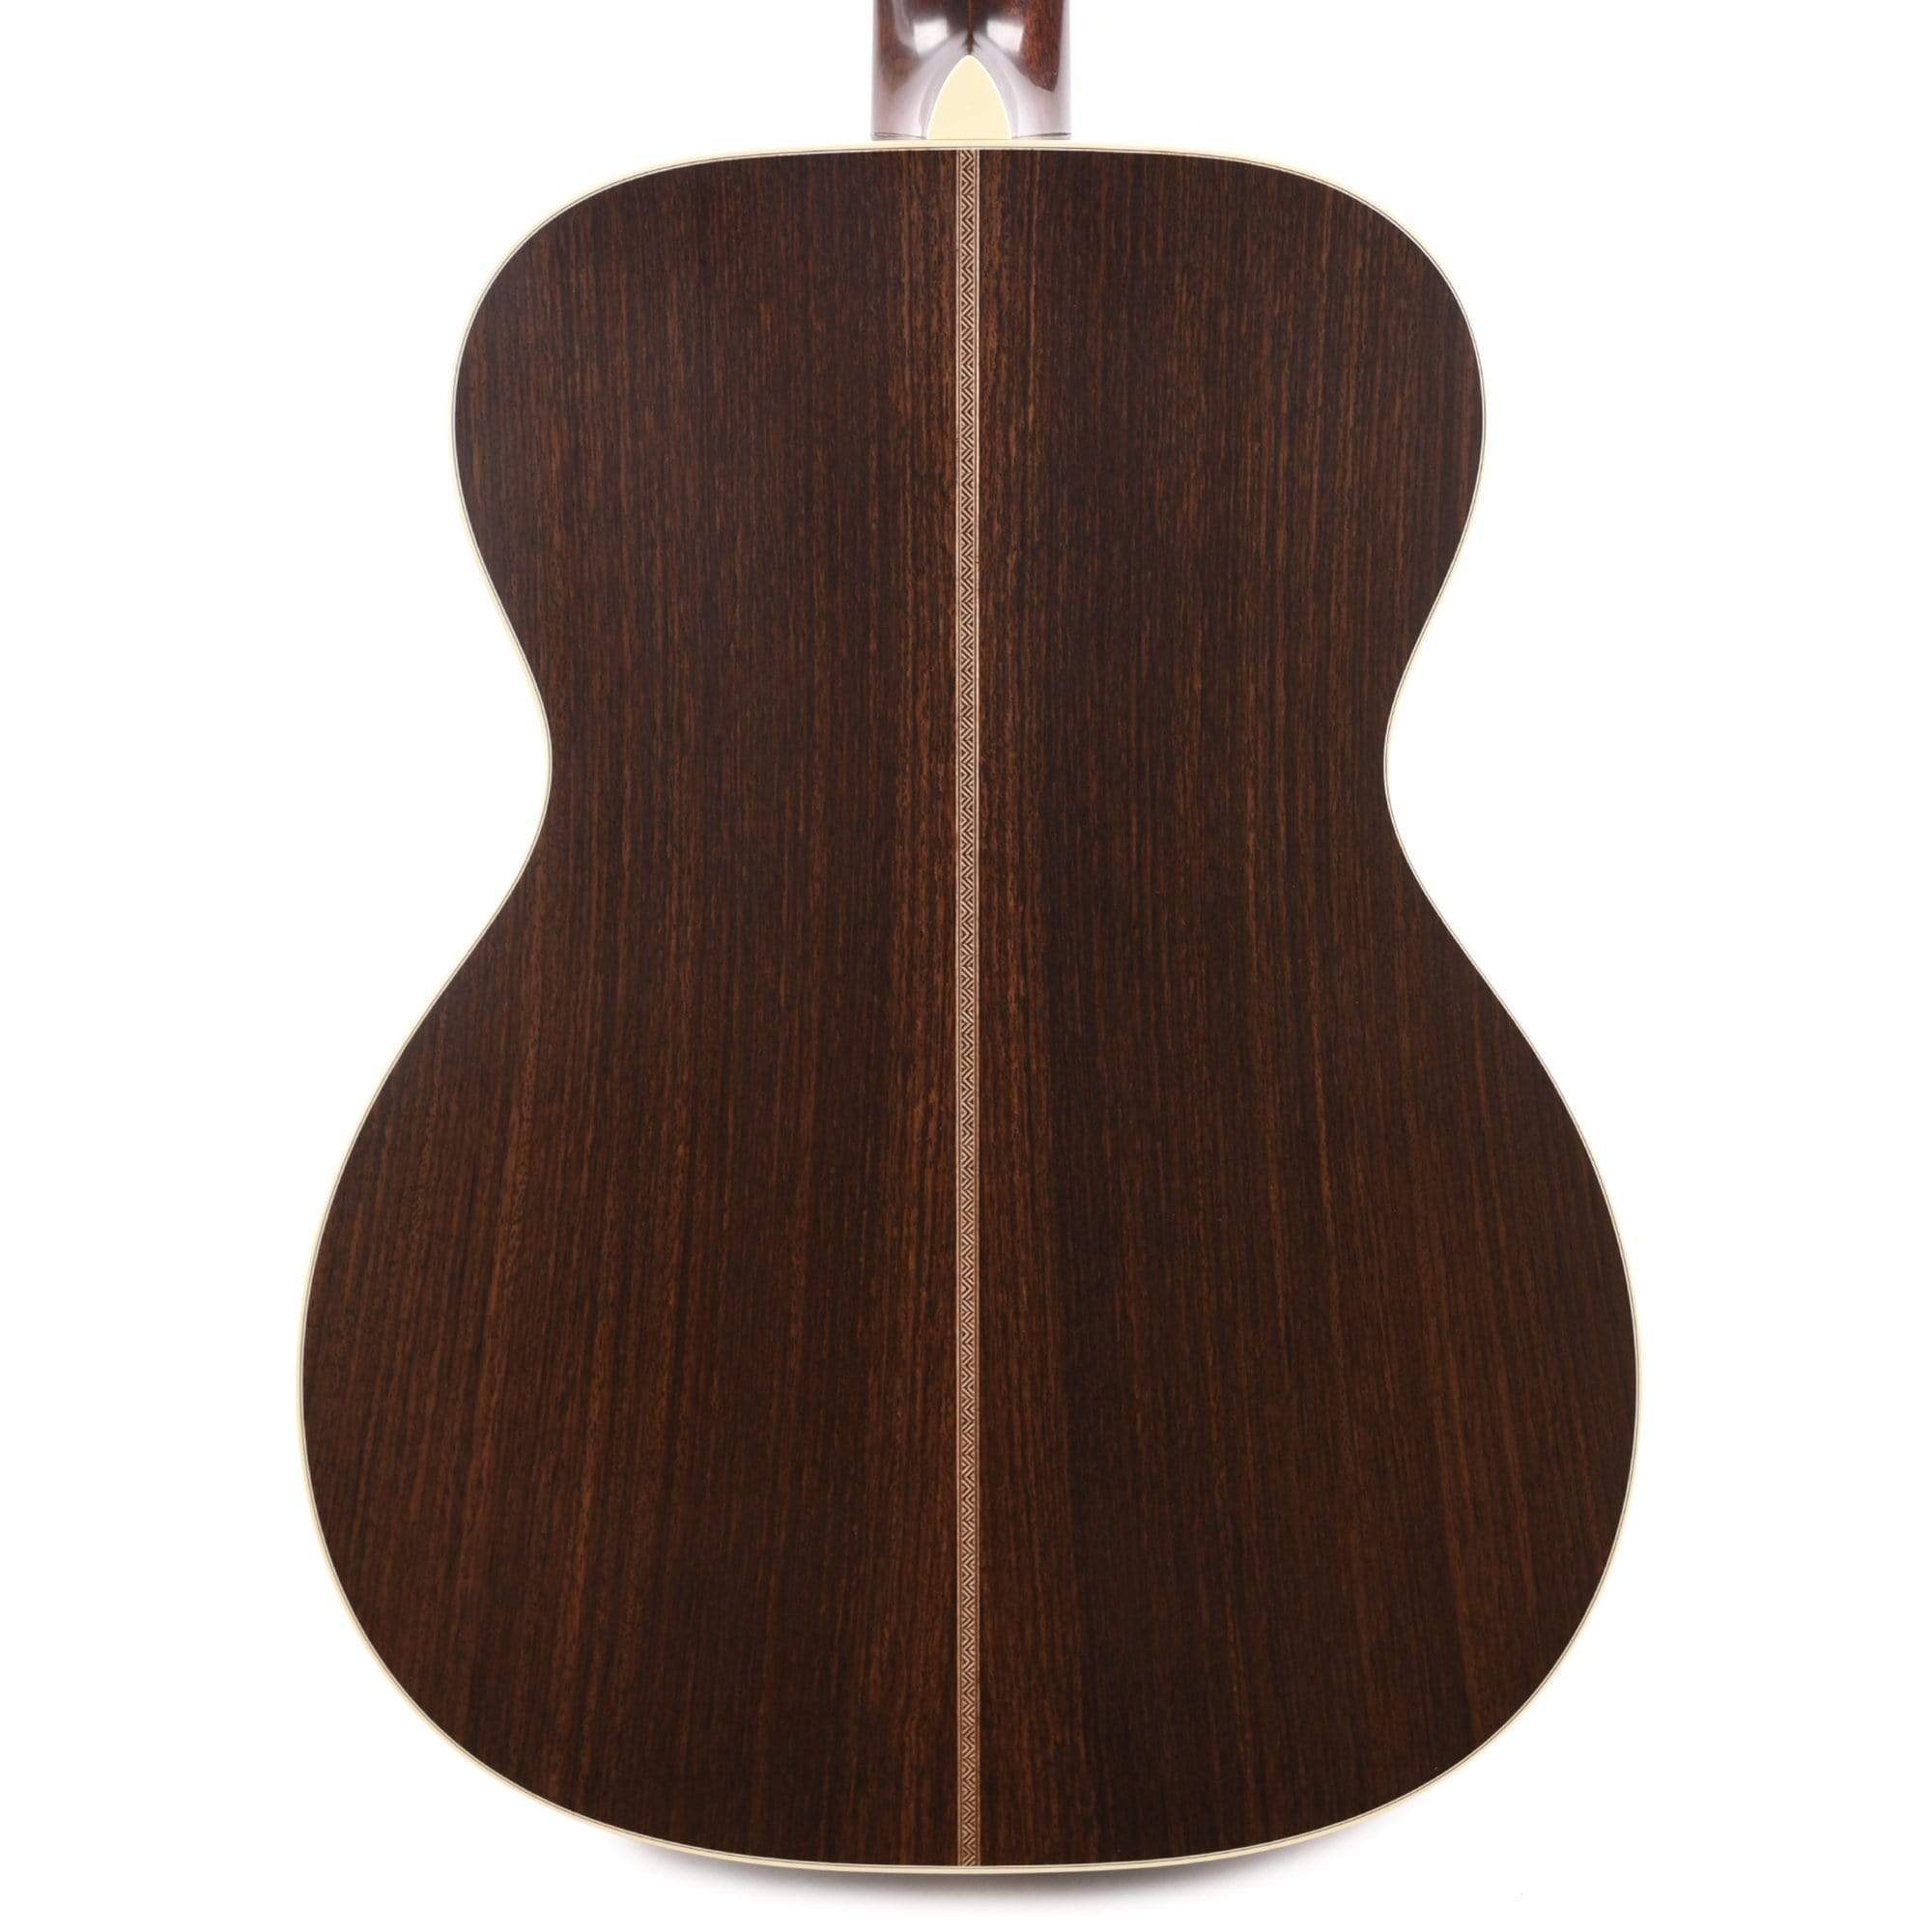 Martin Custom Shop 000-28 Authentic 1937 Natural Vintage Low Gloss Acoustic Guitars / OM and Auditorium